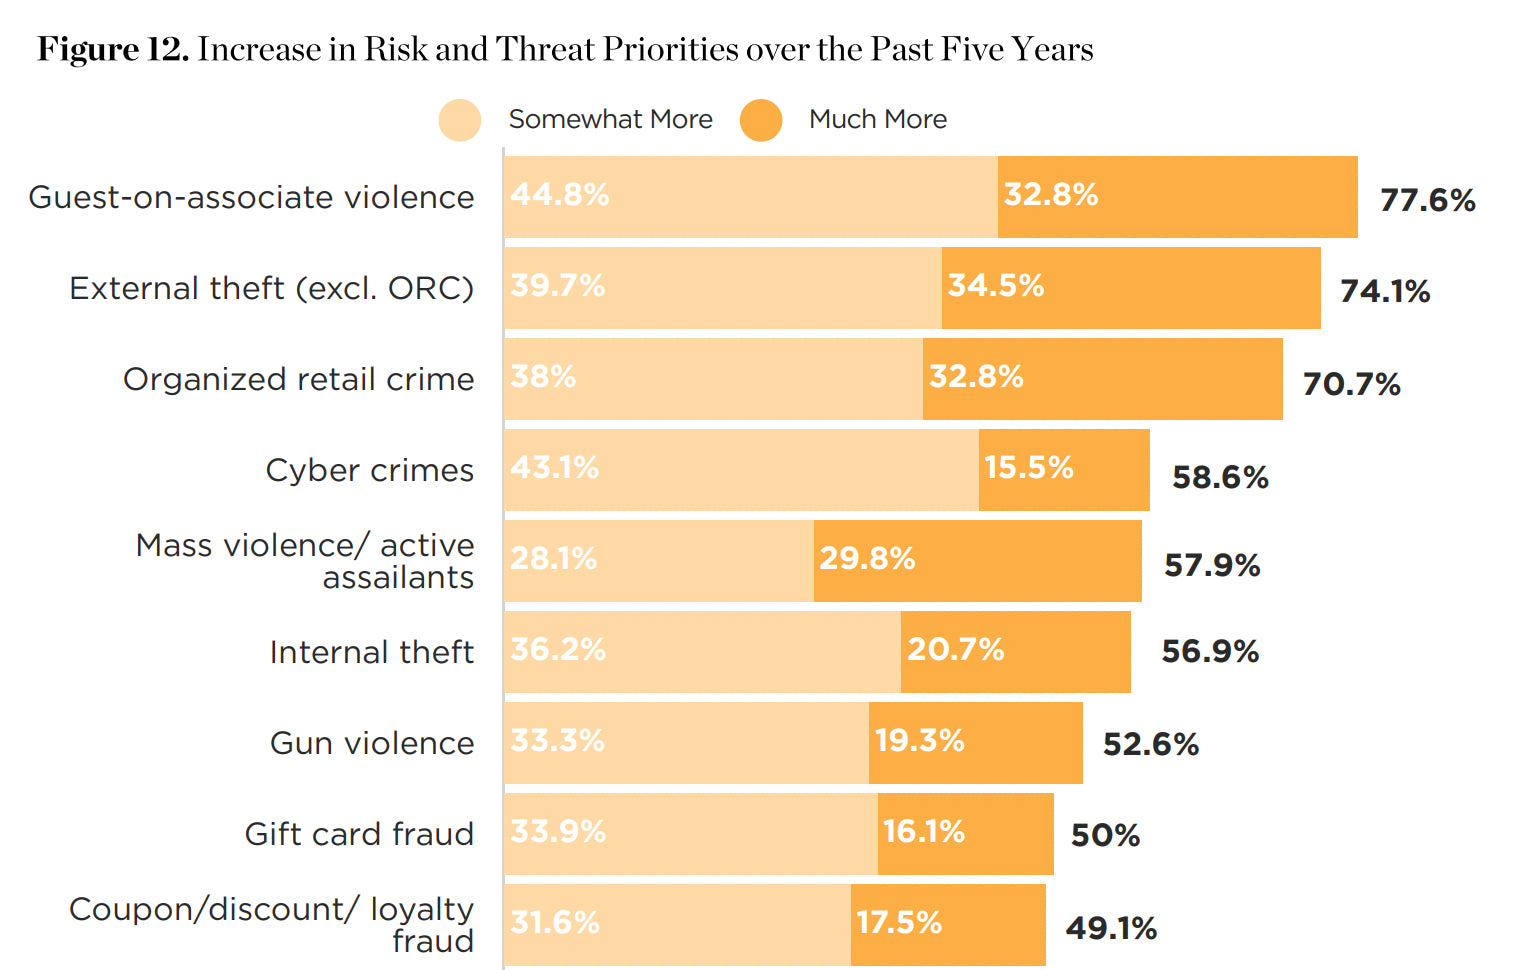 Orange bar chart displaying how retailers think the risk of guest-on-associate violence, external theft, and organized retail crime have increased.